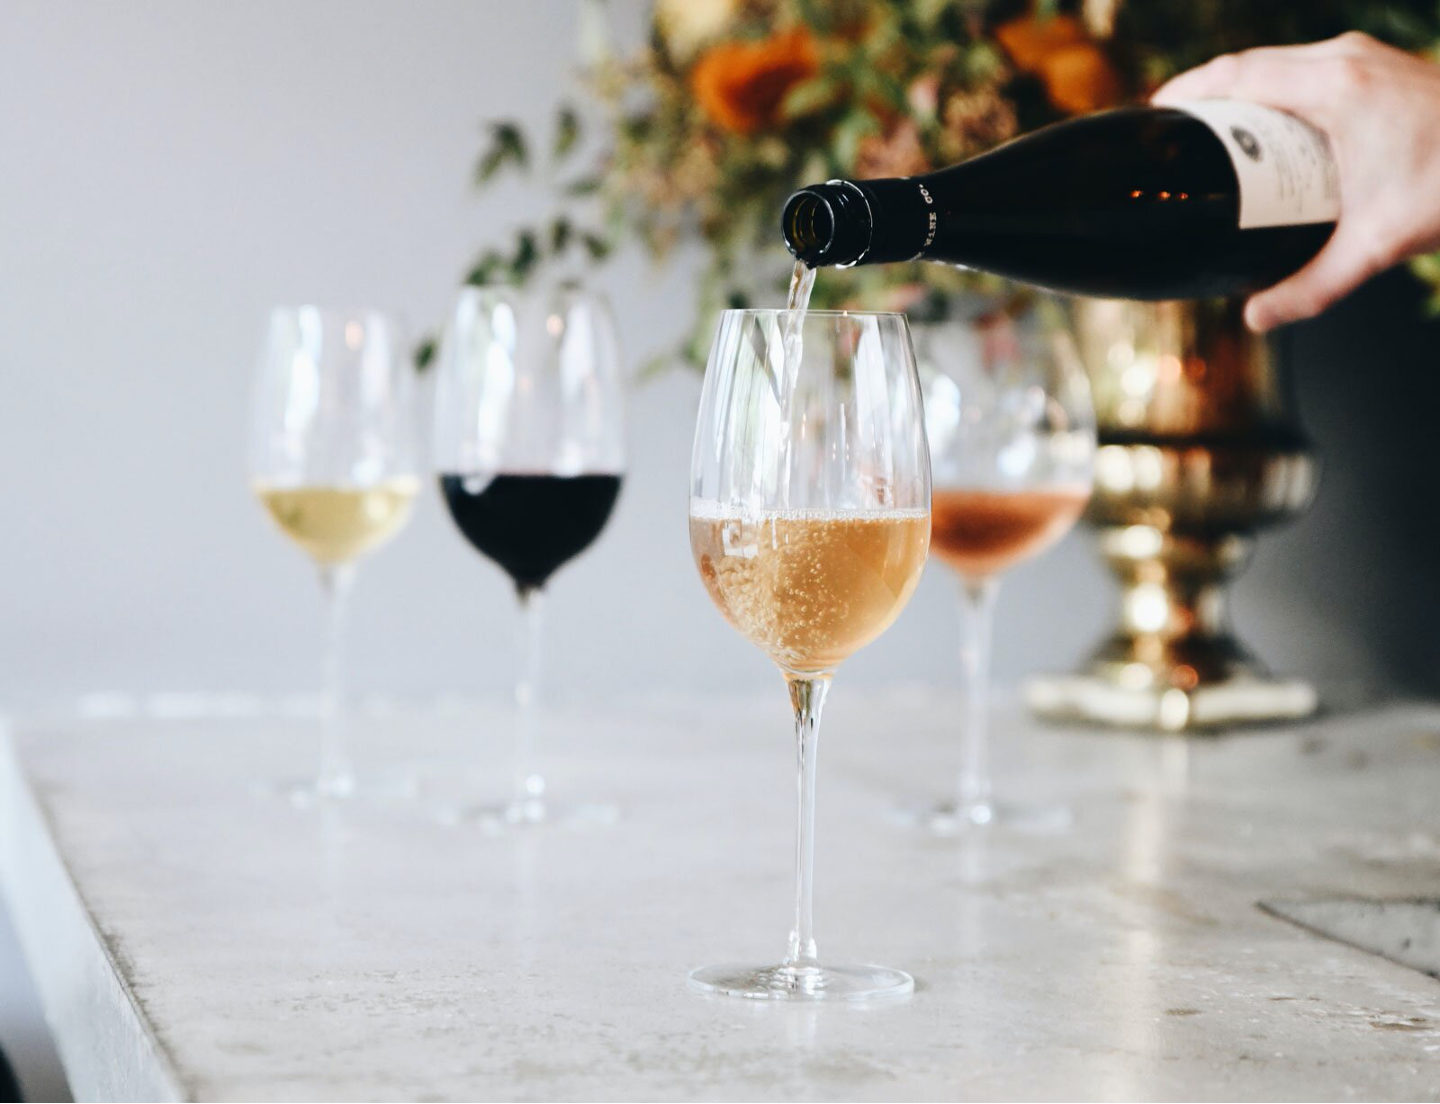 Pouring wines into four goblets